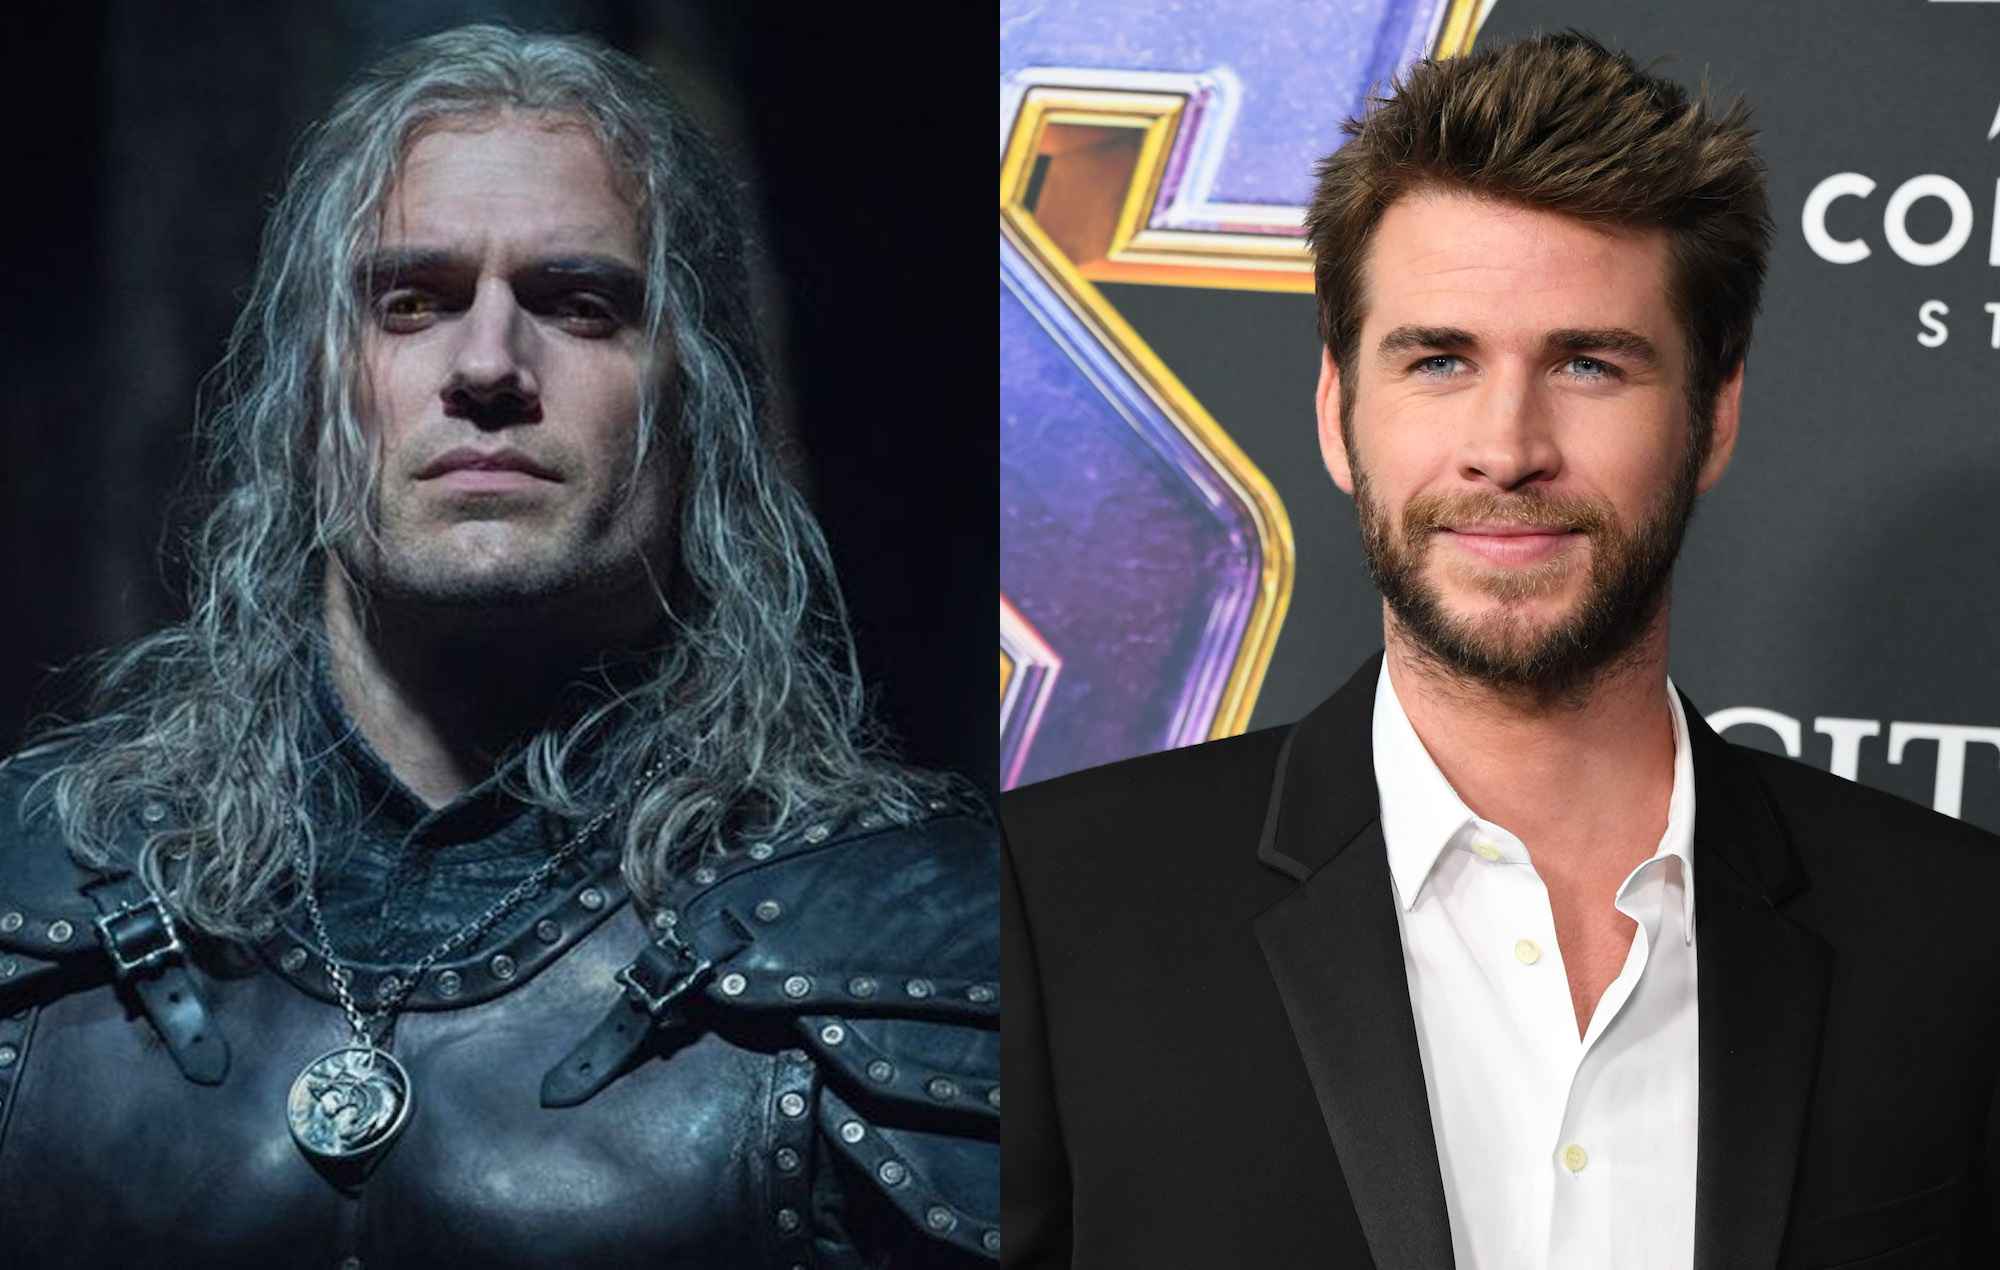 The Witcher Season 4 Confirmed But At The Cost Of Henry Cavill Being  Replaced By Liam Hemsworth, Fans Lament